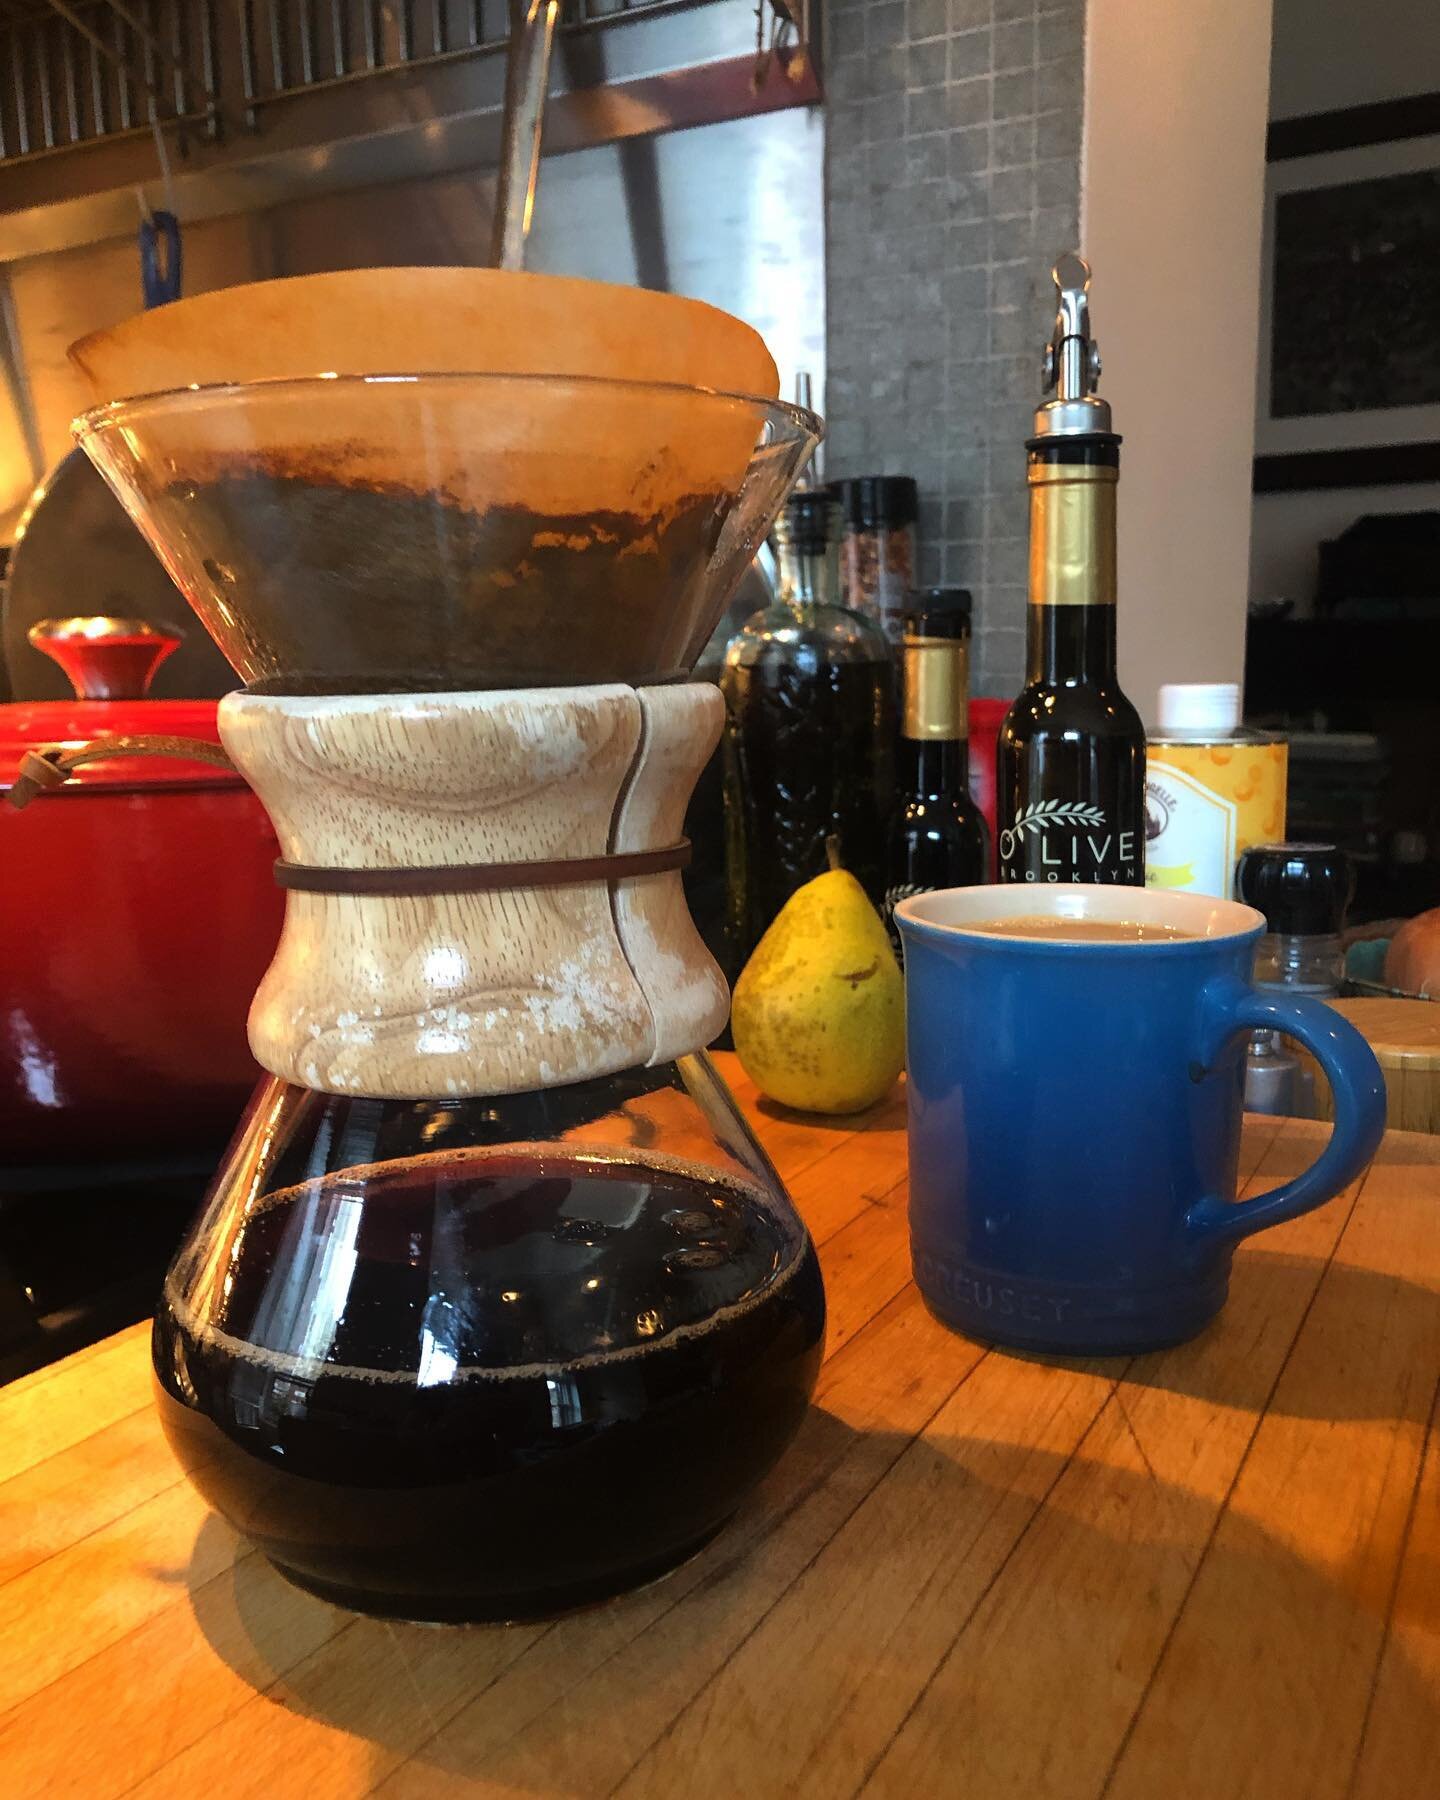 As anyone who prepares their coffee (thank you @bucklyncoffee for a transcendent Ethiopian Guji) in a Chemex will tell you, it is an act of time and patience that yields a truly superior experience. That time is also something I try to use to practic